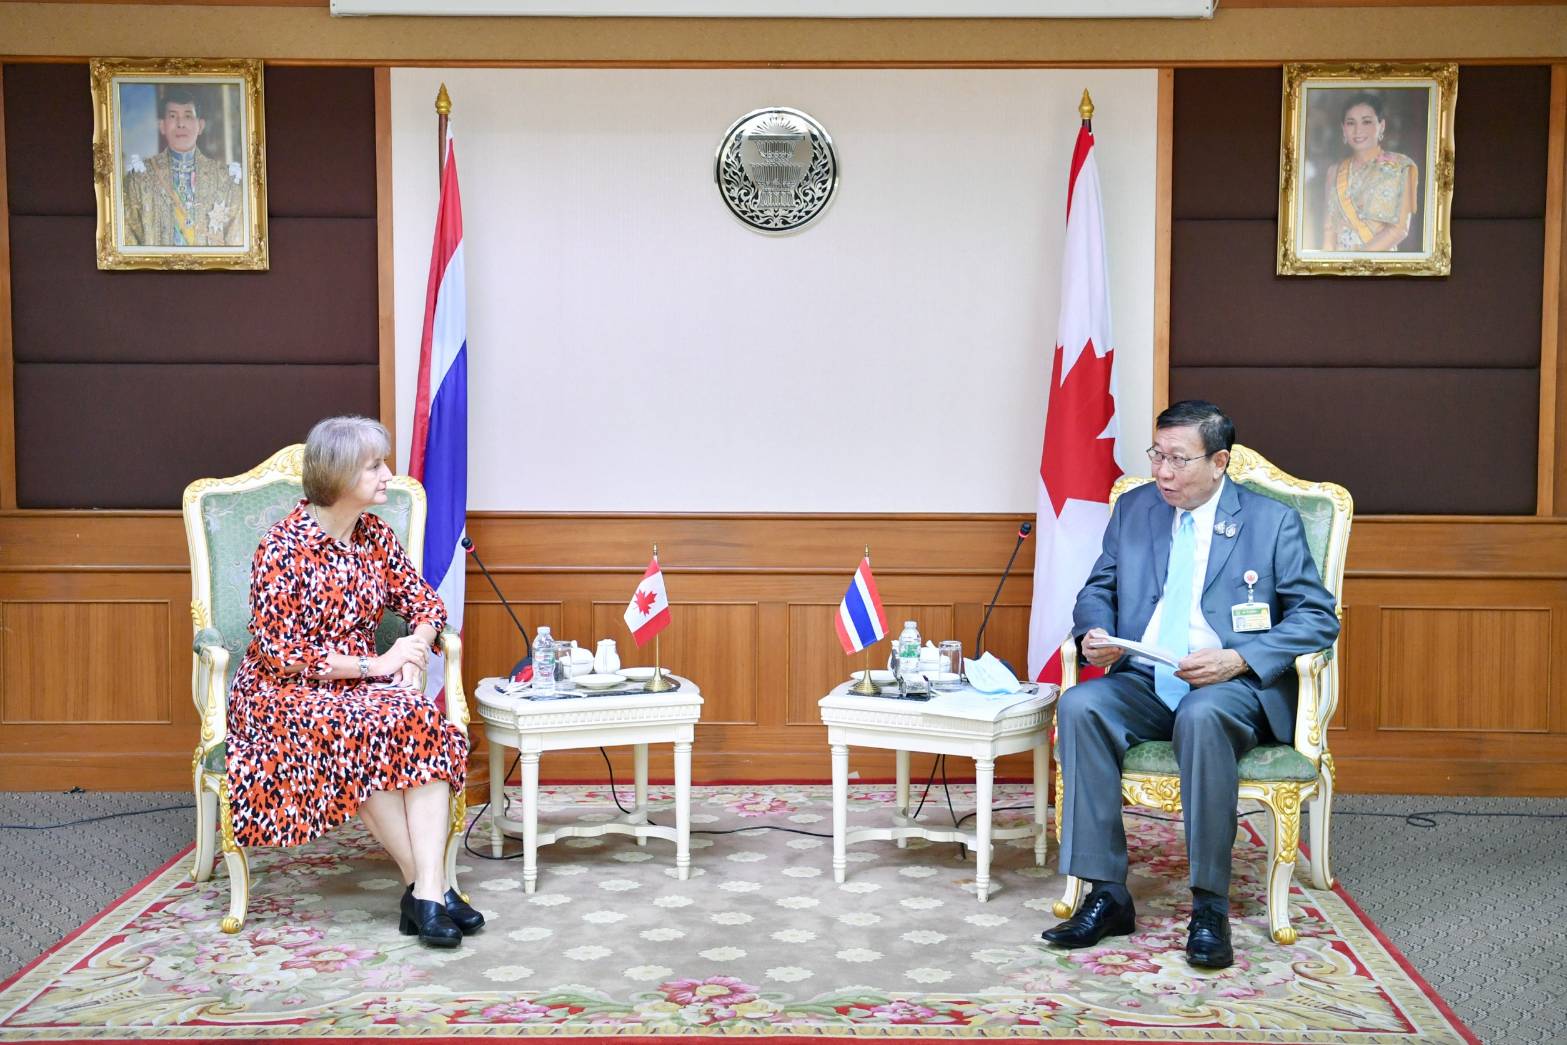 H.E. Mrs. Sarah Taylor, Ambassador of Canada to Thailand Paid a Courtesy Call on the President of the Senate (Thursday 20 August 2020)